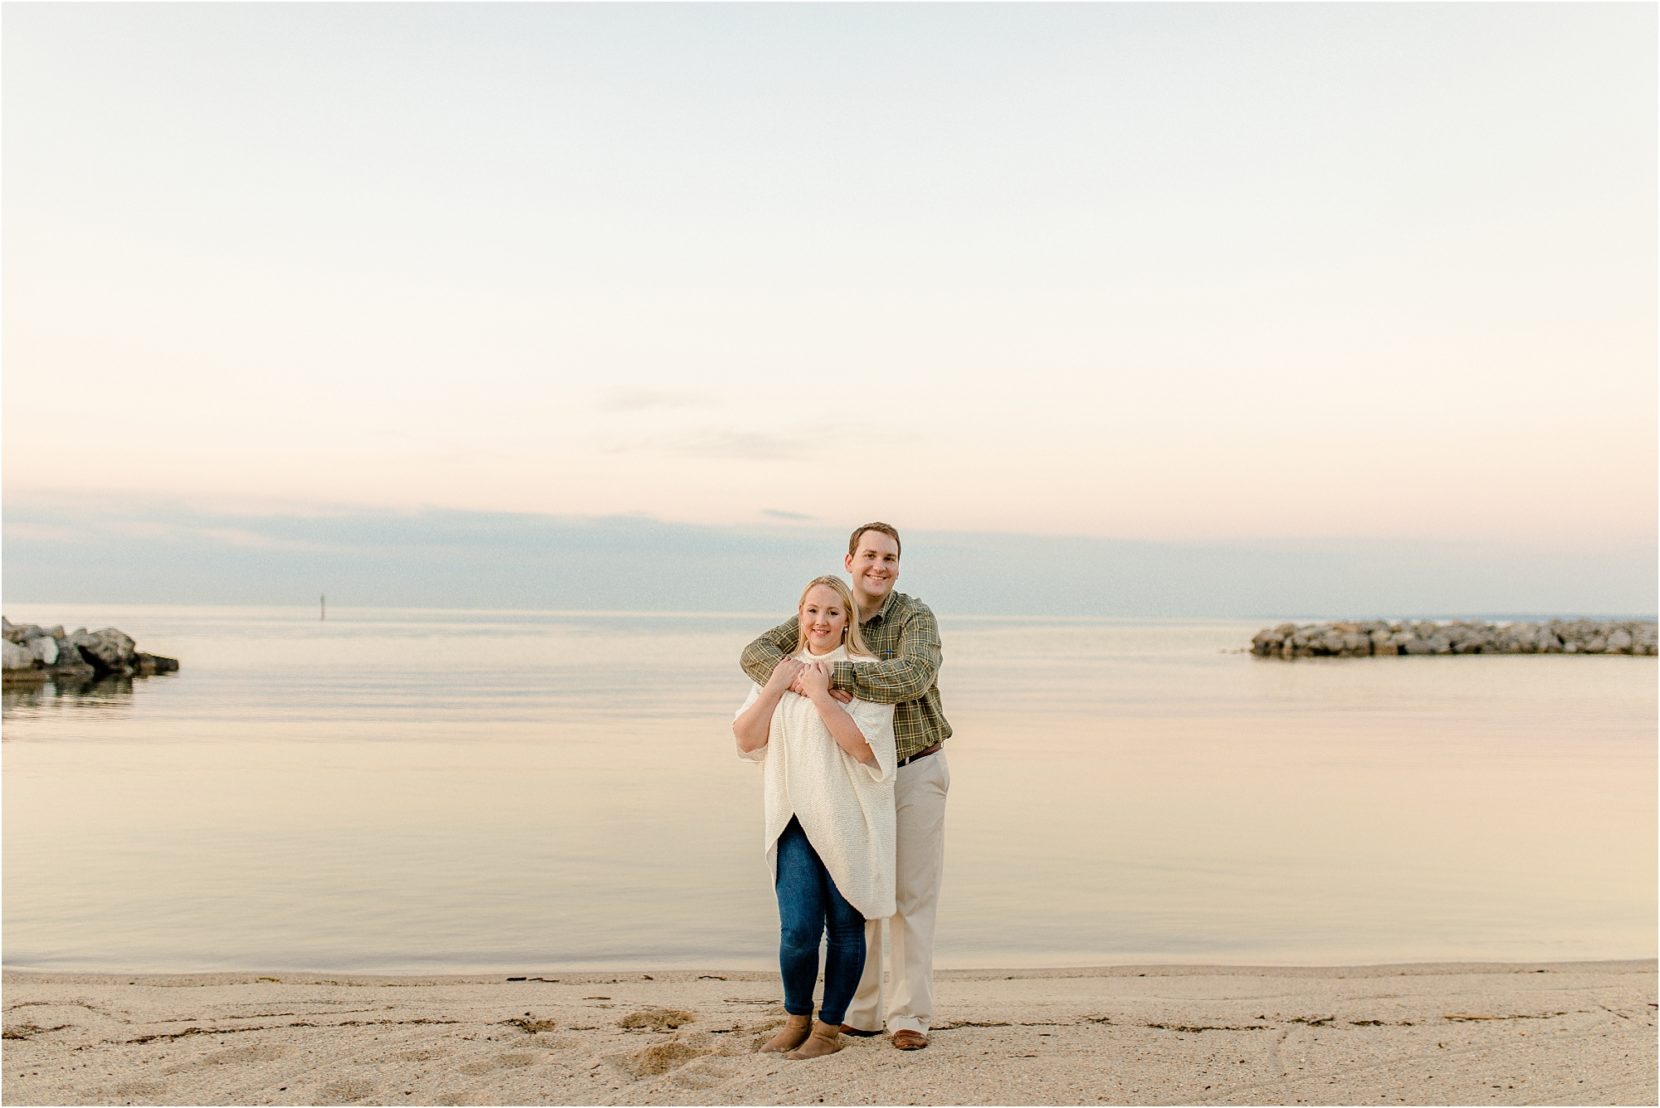 the grand mariott point clear alabama engagement session 0017